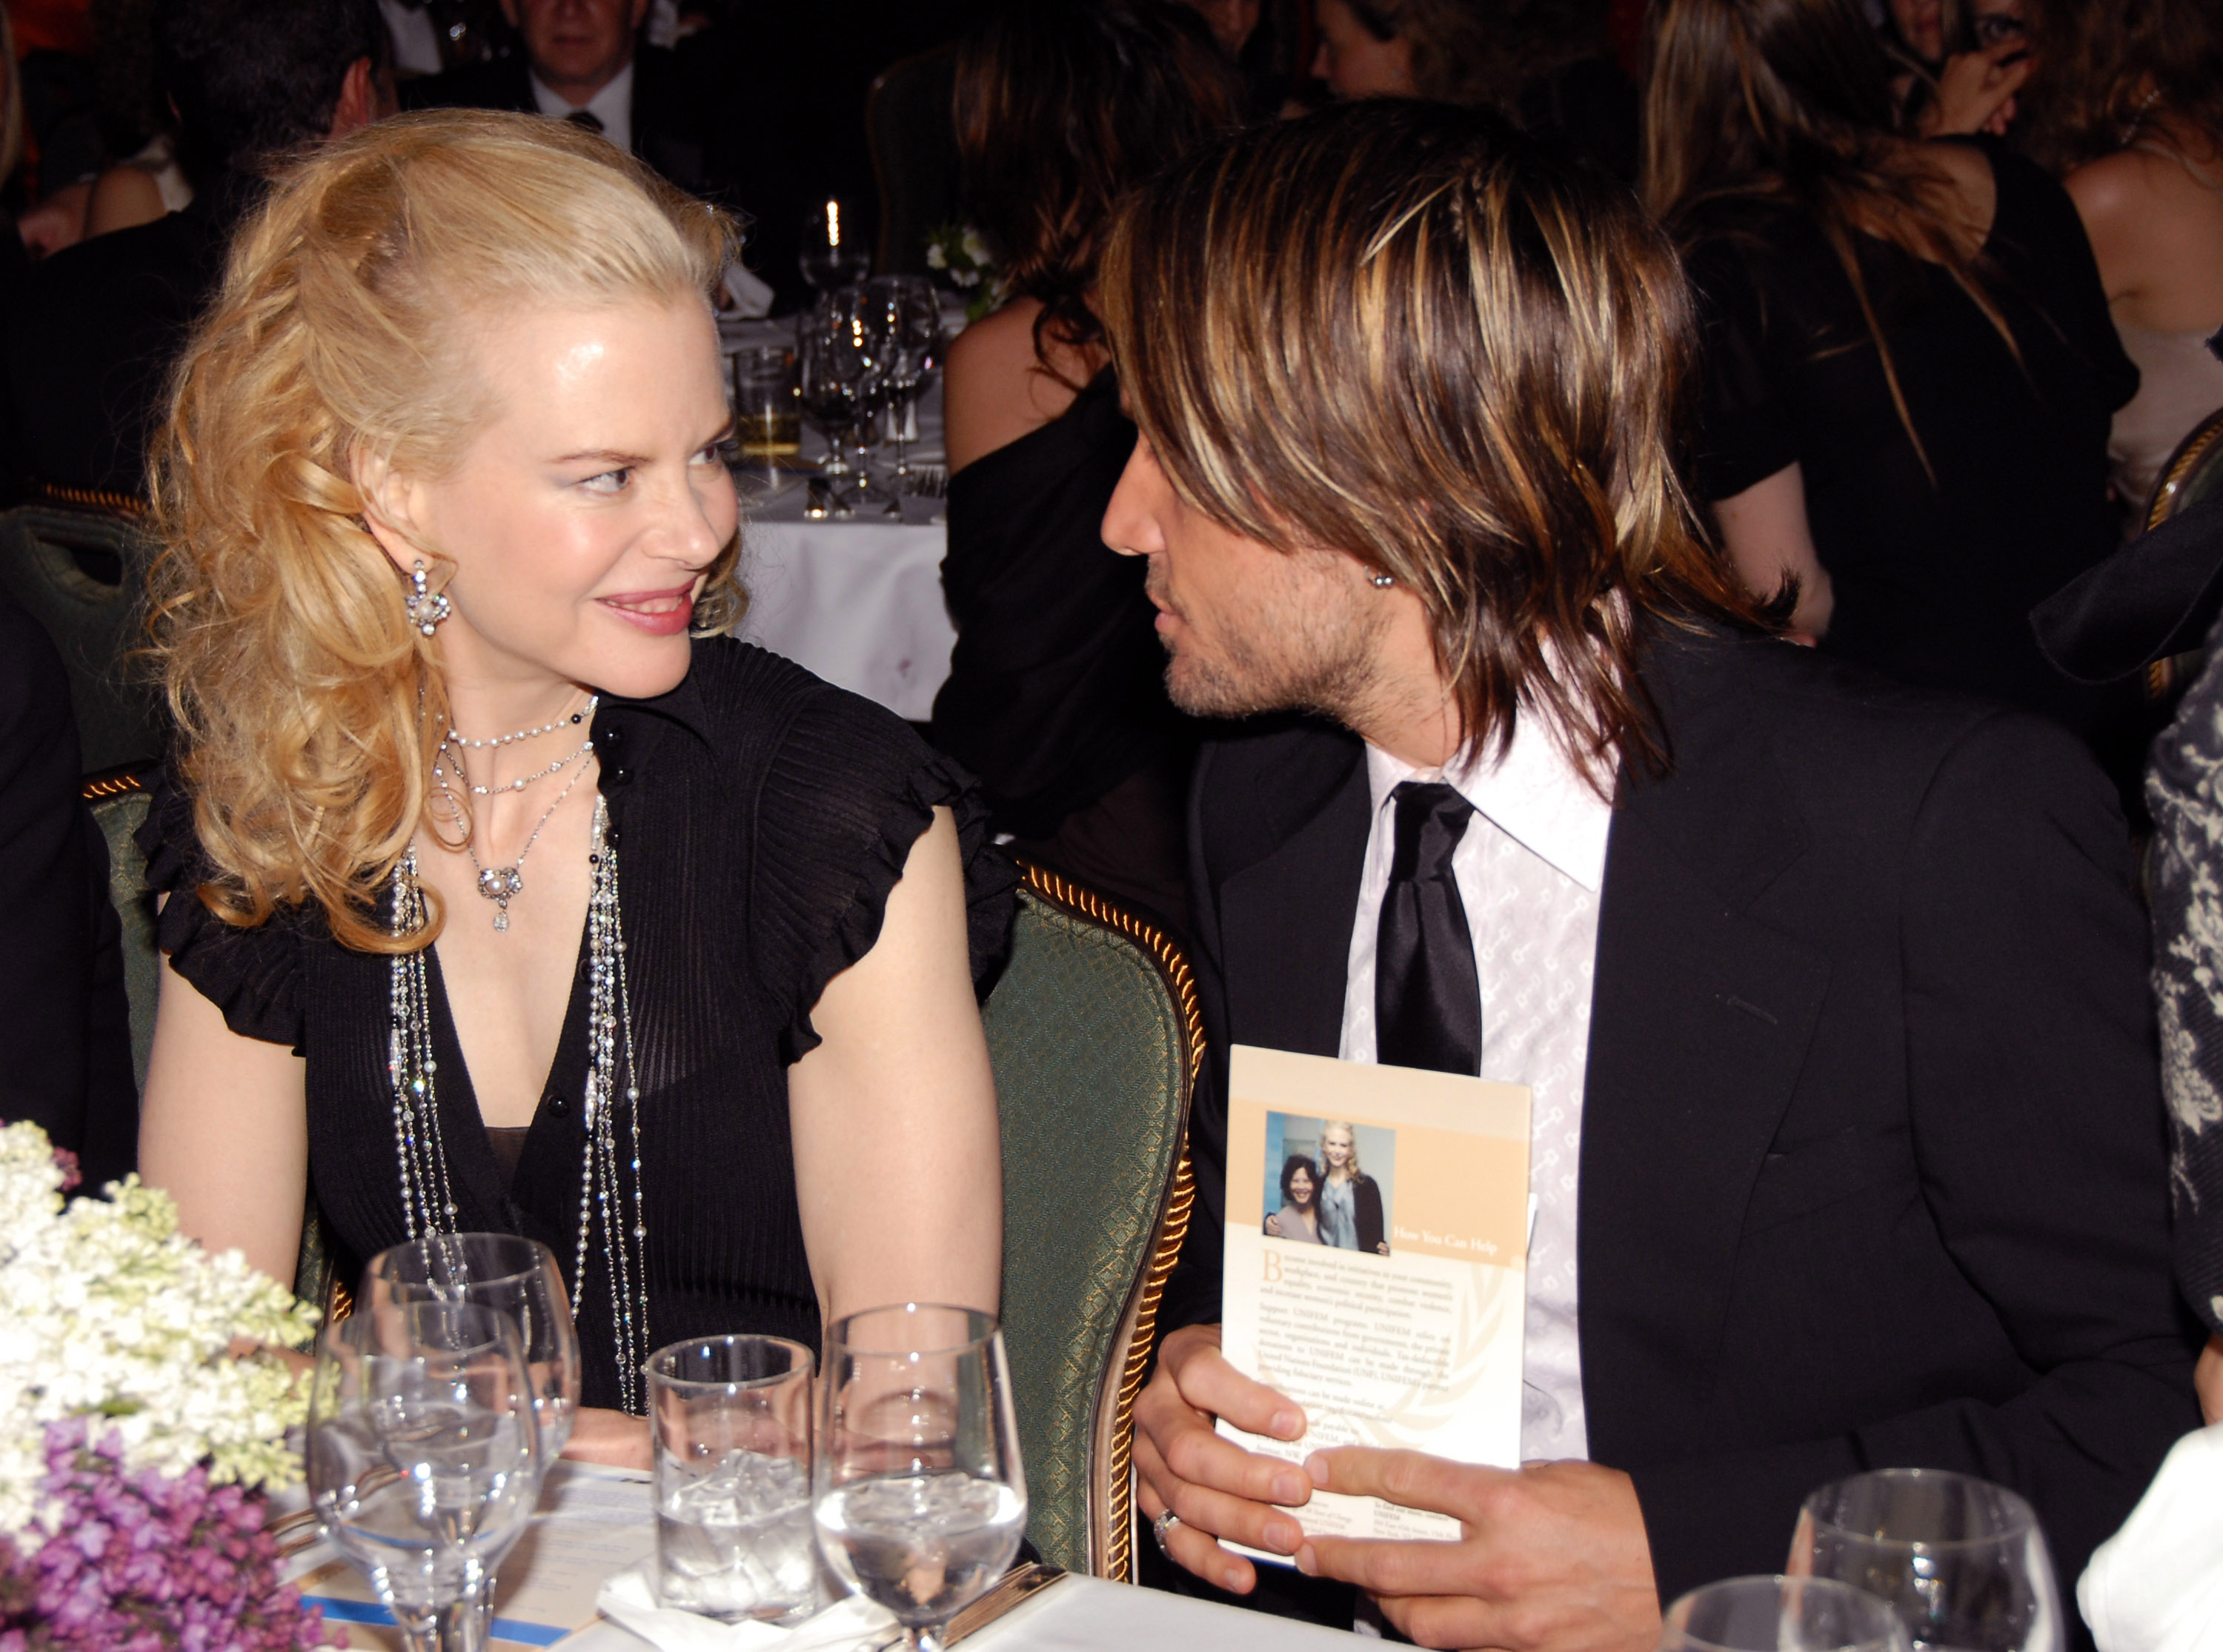 Nicole Kidman and Keith Urban during UNIFEM's 30th Anniversary Celebration hosted by Kidman in New York City on May 13, 2006. | Source: Getty Images